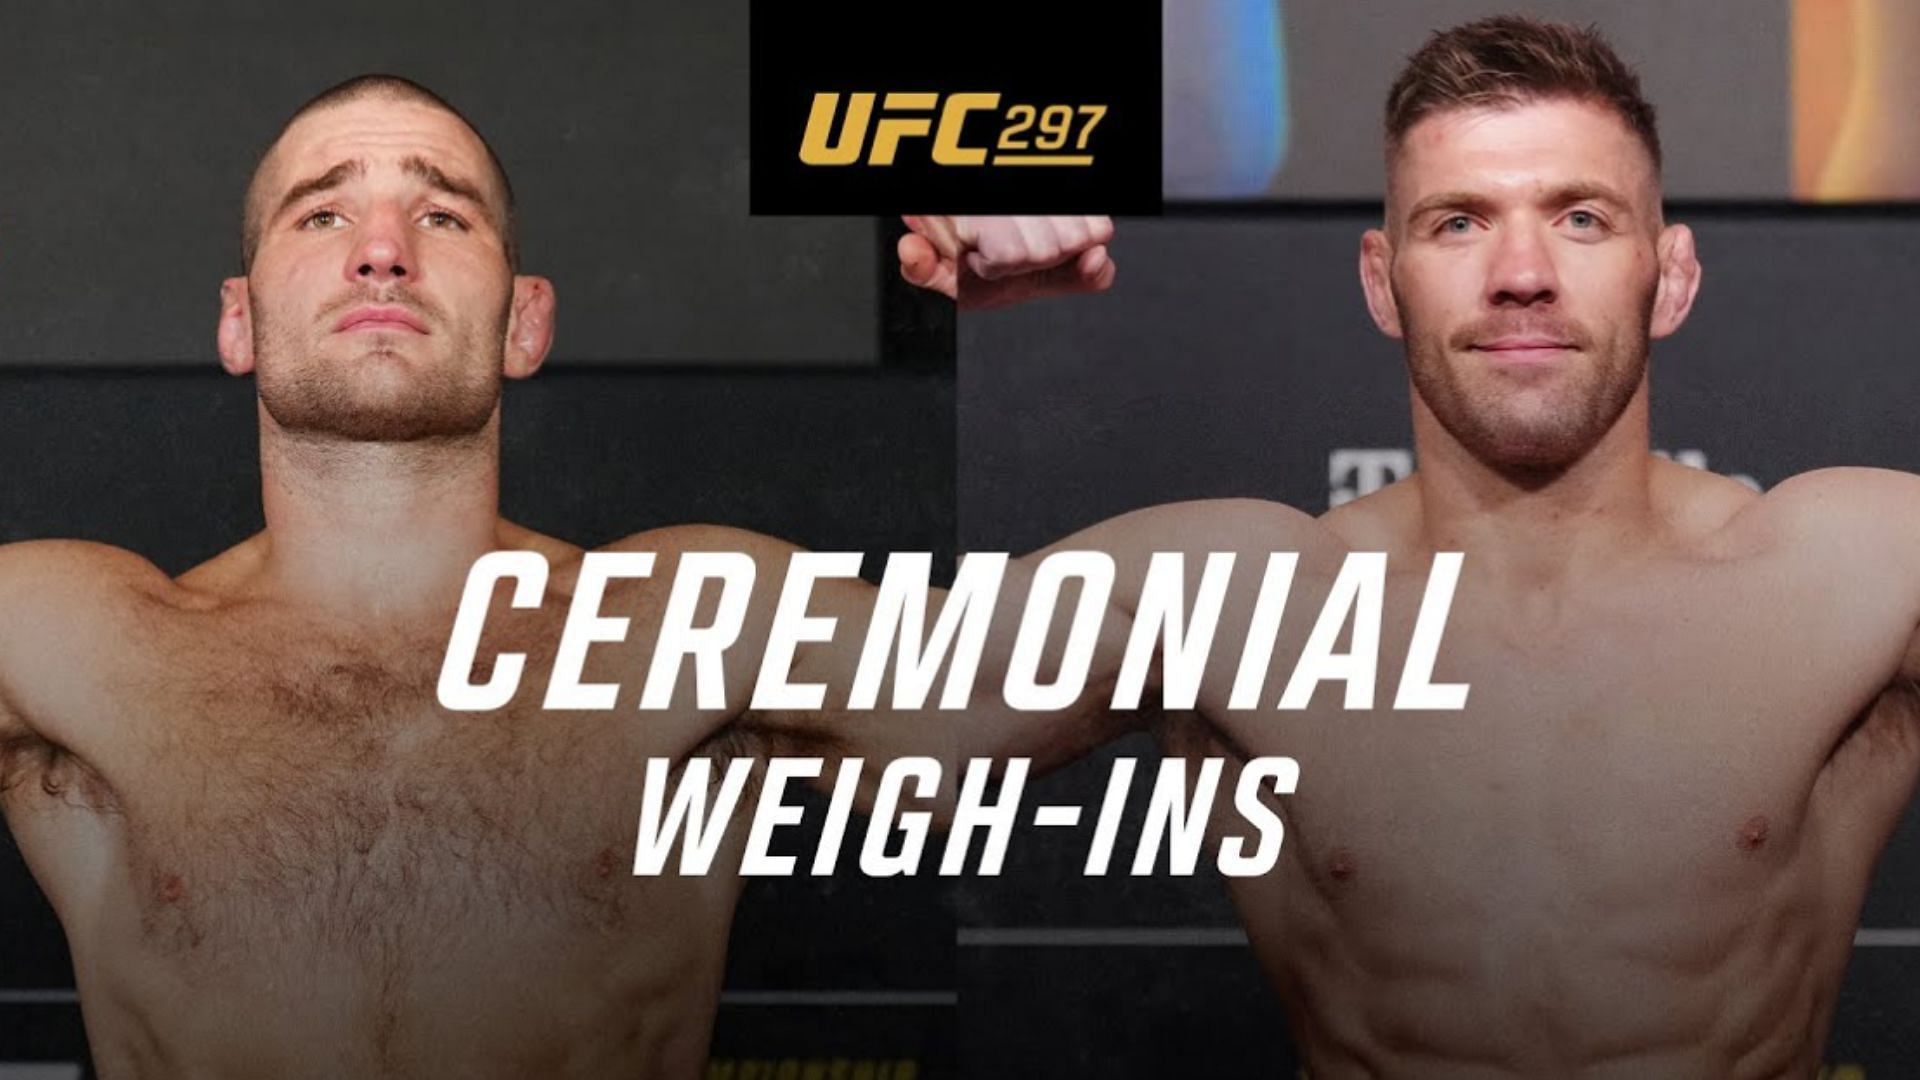  UFC 297 ceremonial weigh-ins time confirmed [Image courtesy of @UFC on YouTube]